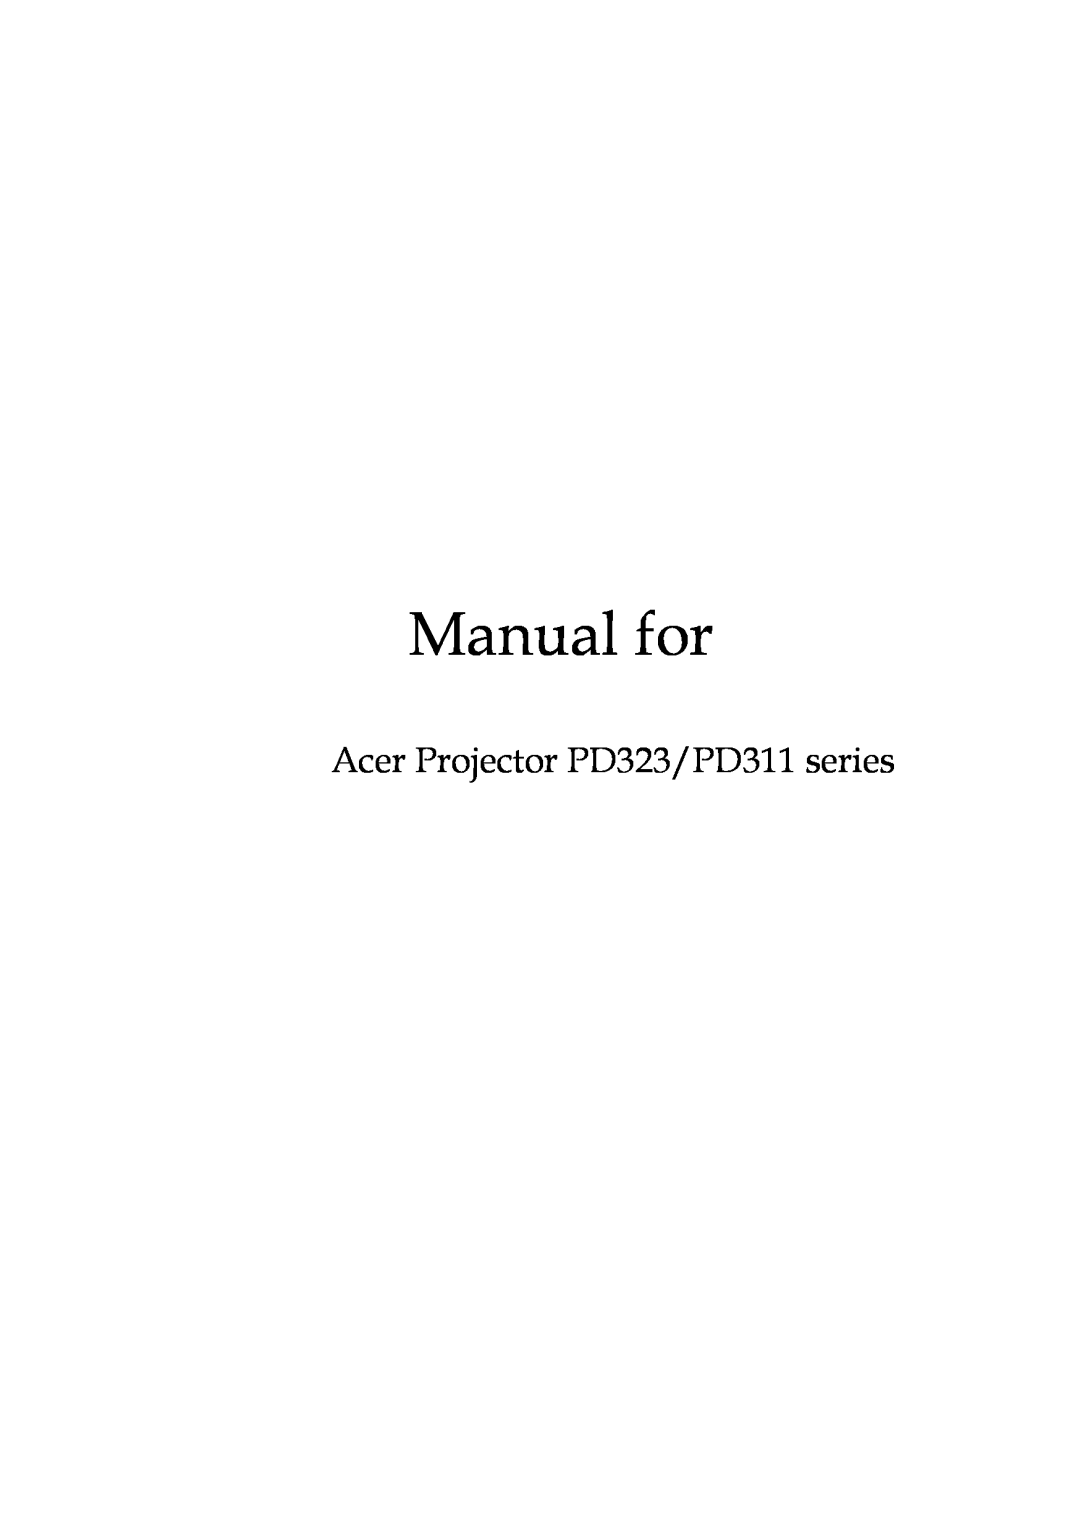 Acer manual Manual for, Acer Projector PD323/PD311 series 